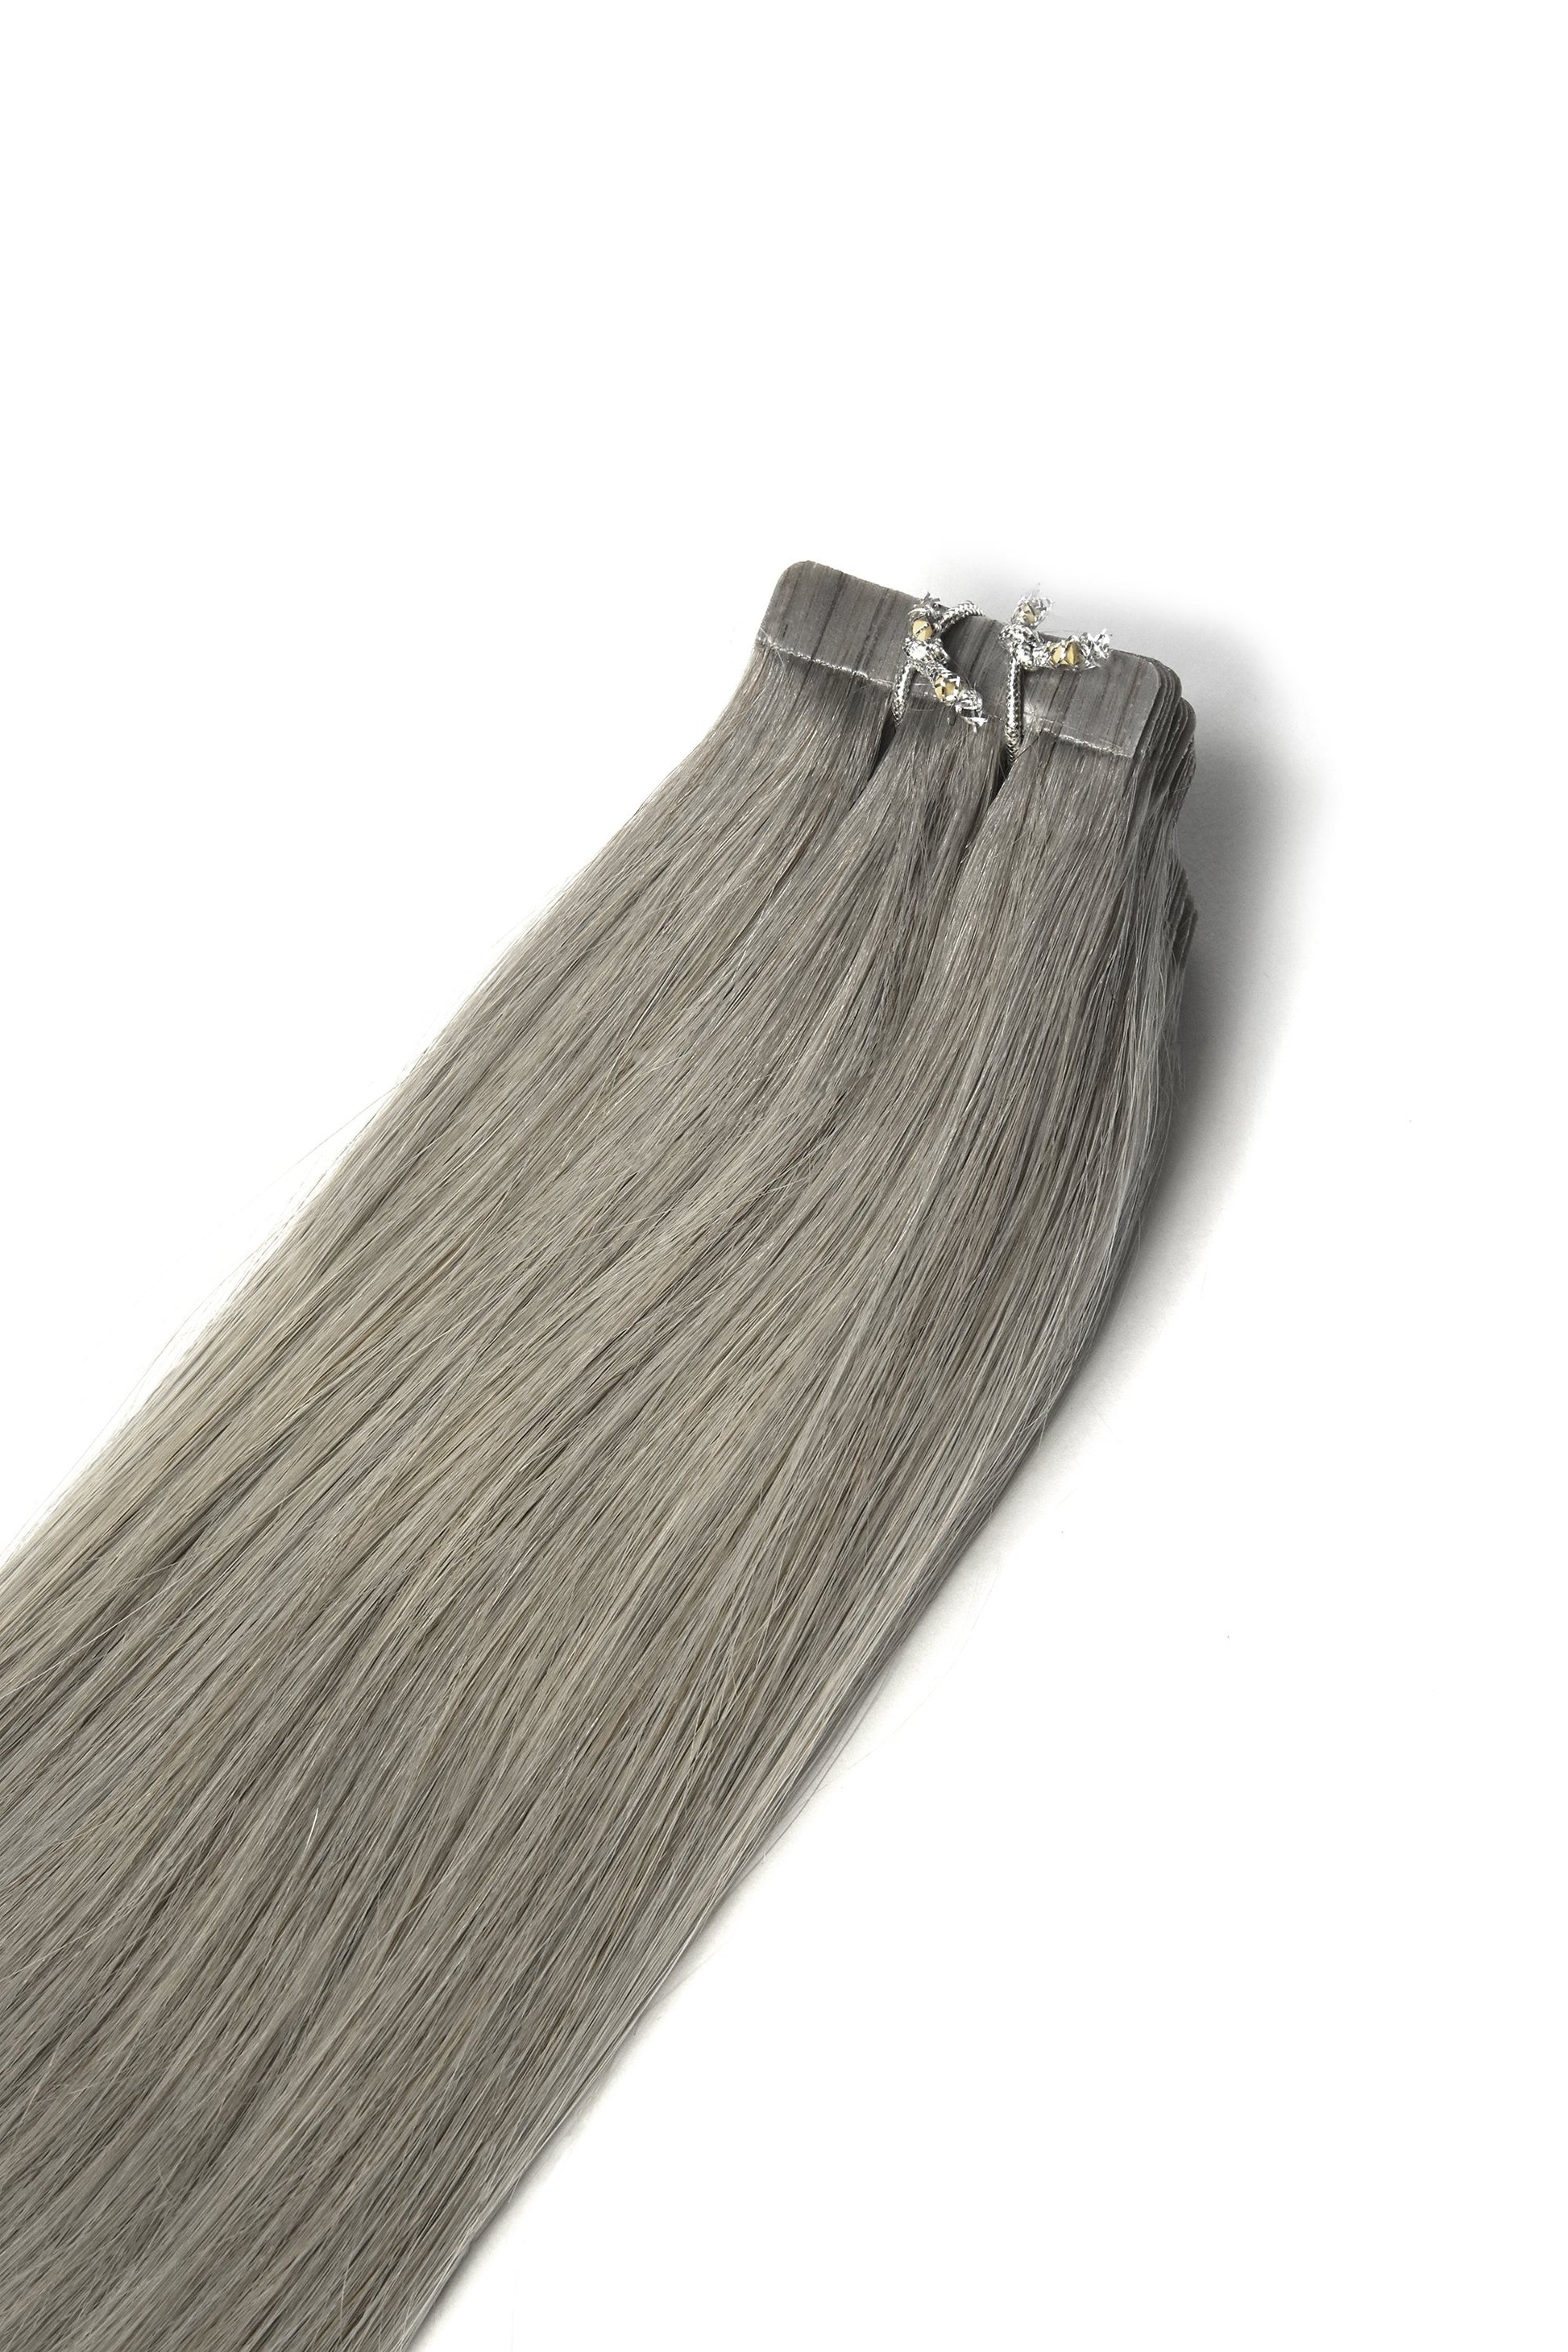 Tape extensions 100% remy human hair - 3-6months life